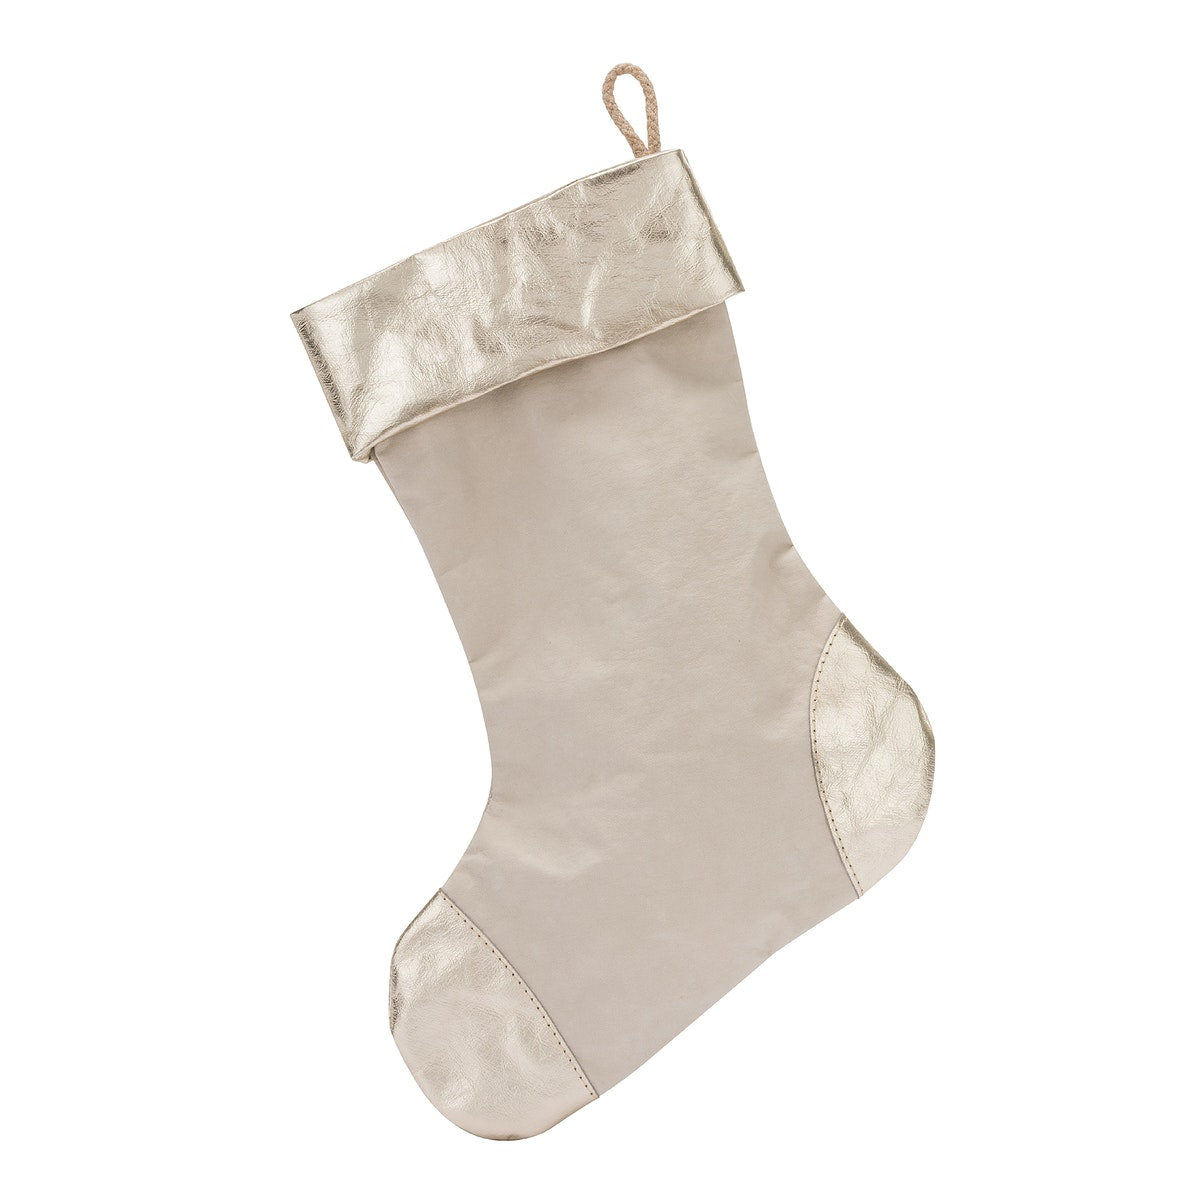 A washable paper Christmas stocking is shown. The body of the stocking is pale cream in colour. There is a fabric hanging loop on the back of the stocking at the top. The cuff, heel and toe of the stocking are metallic platinum.